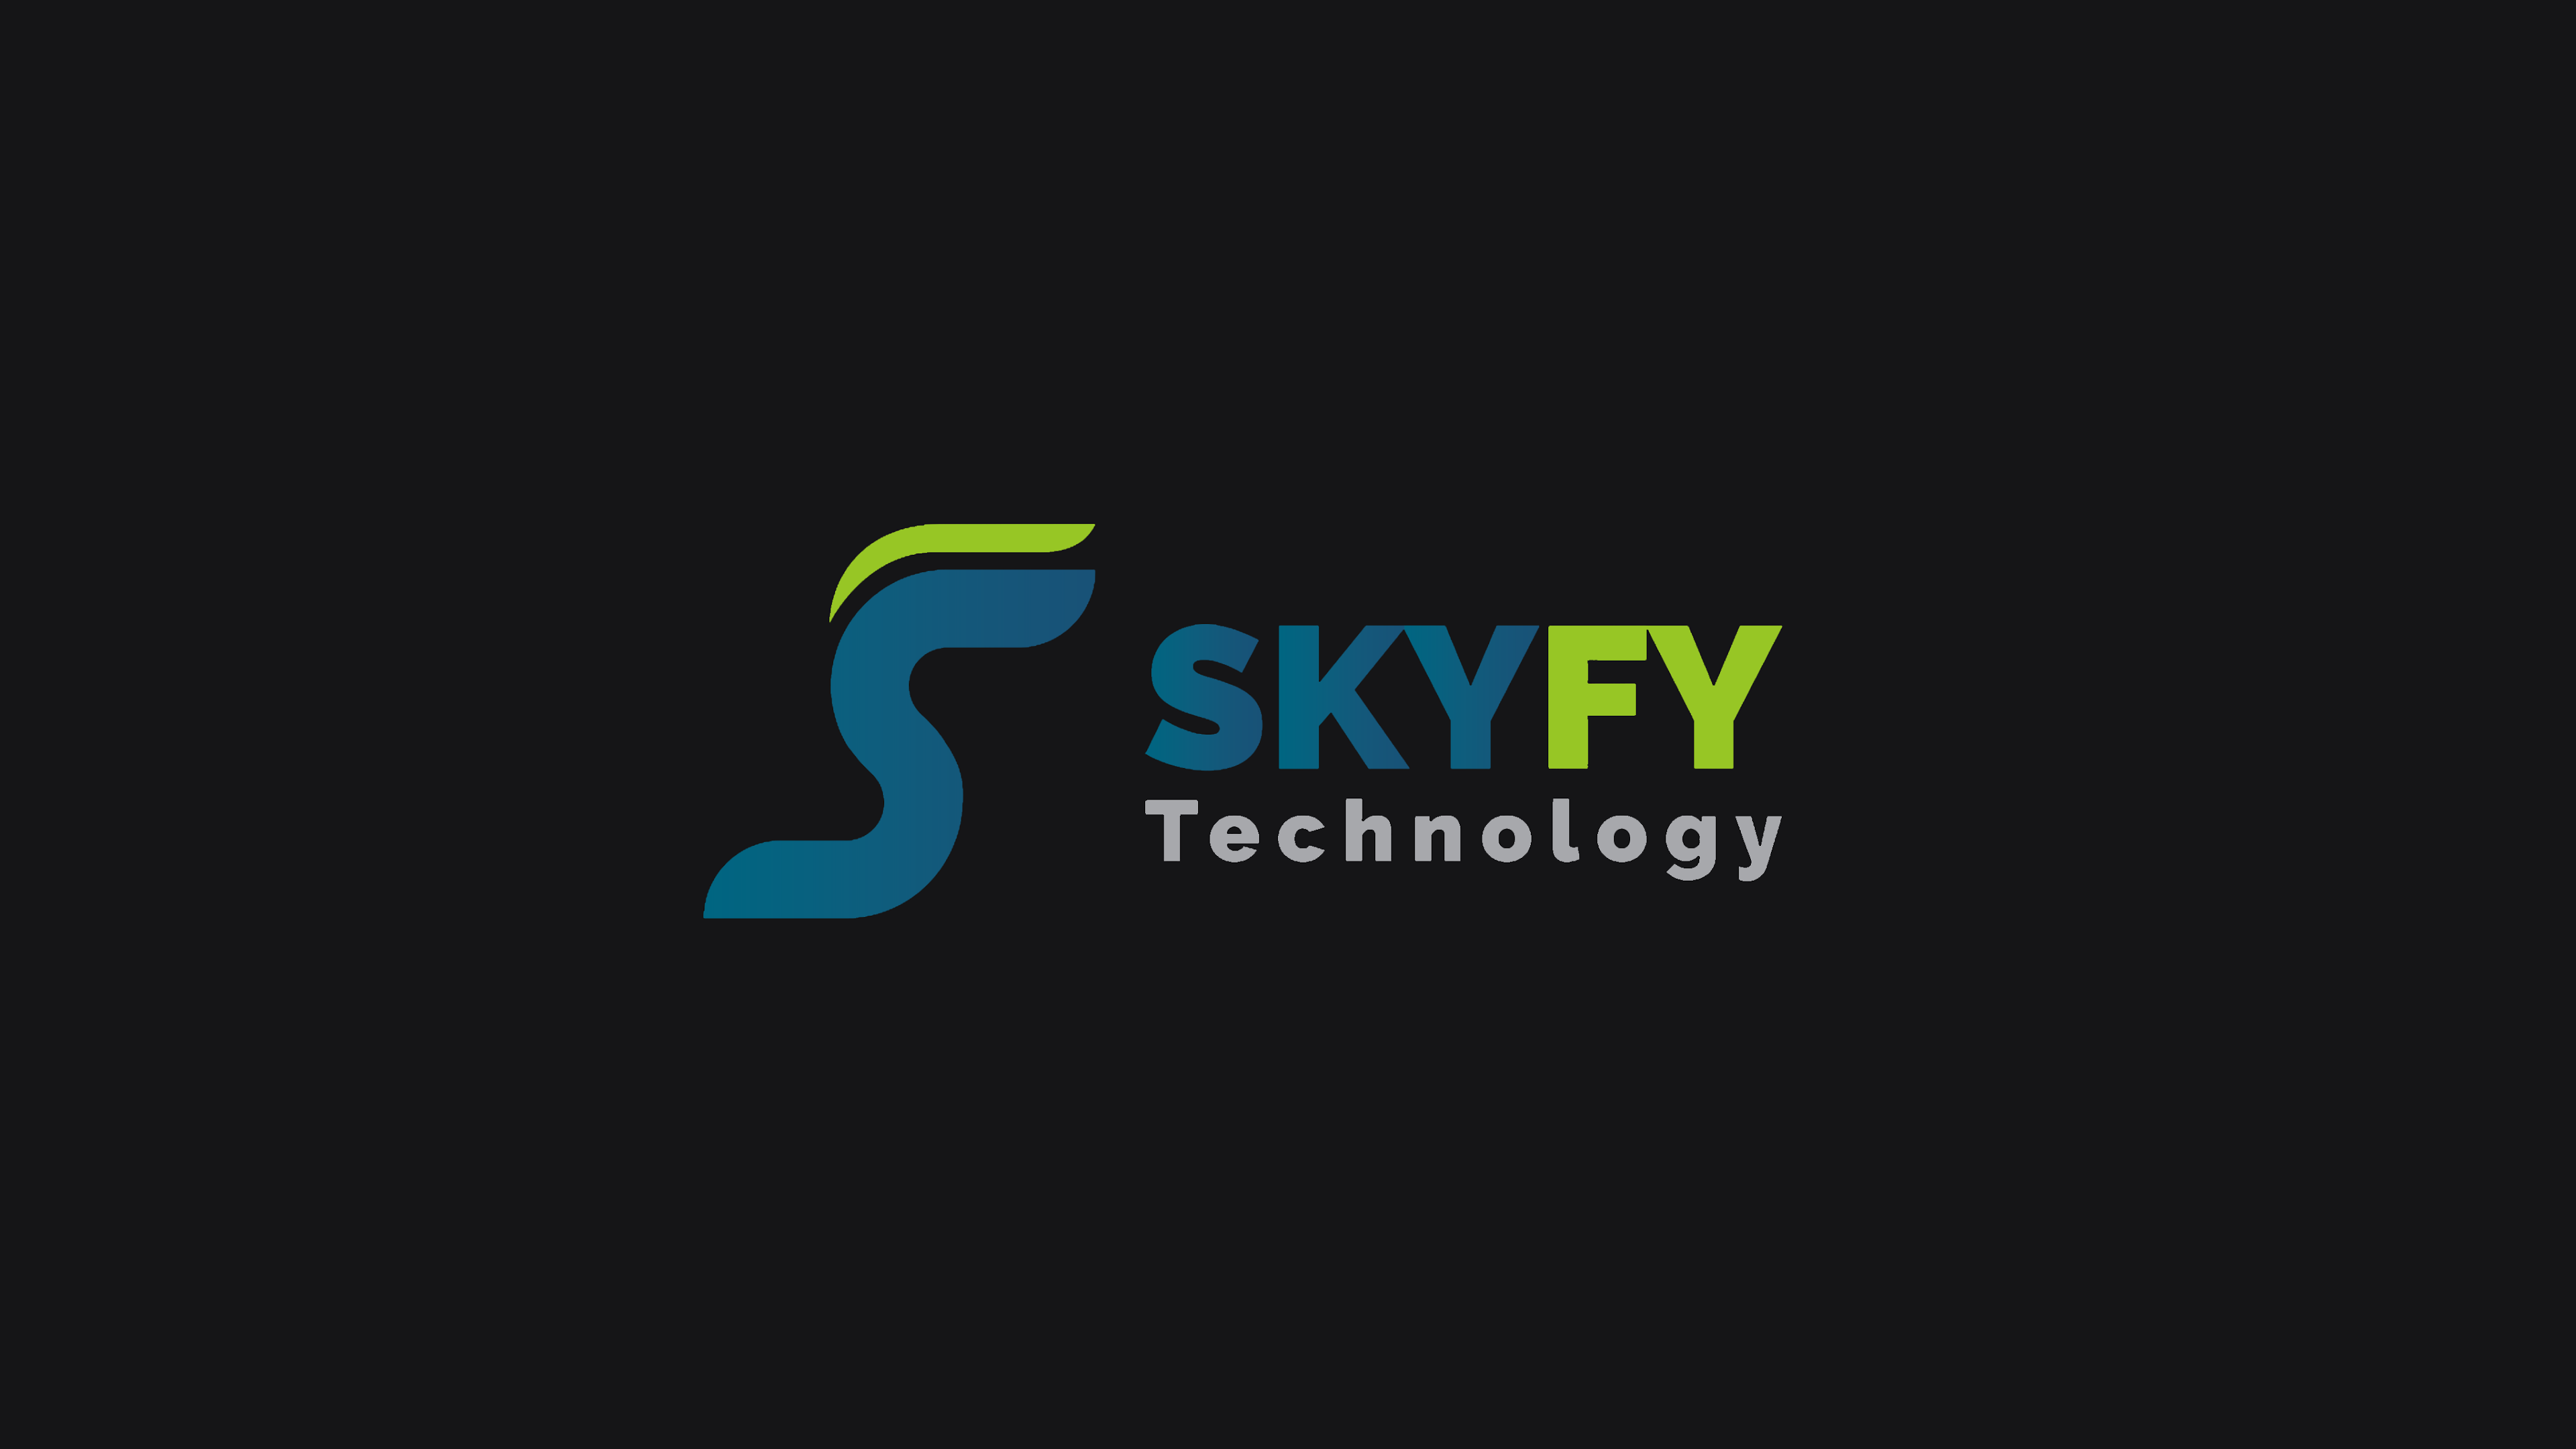 Android Apps by Skyfy Technology on Google Play